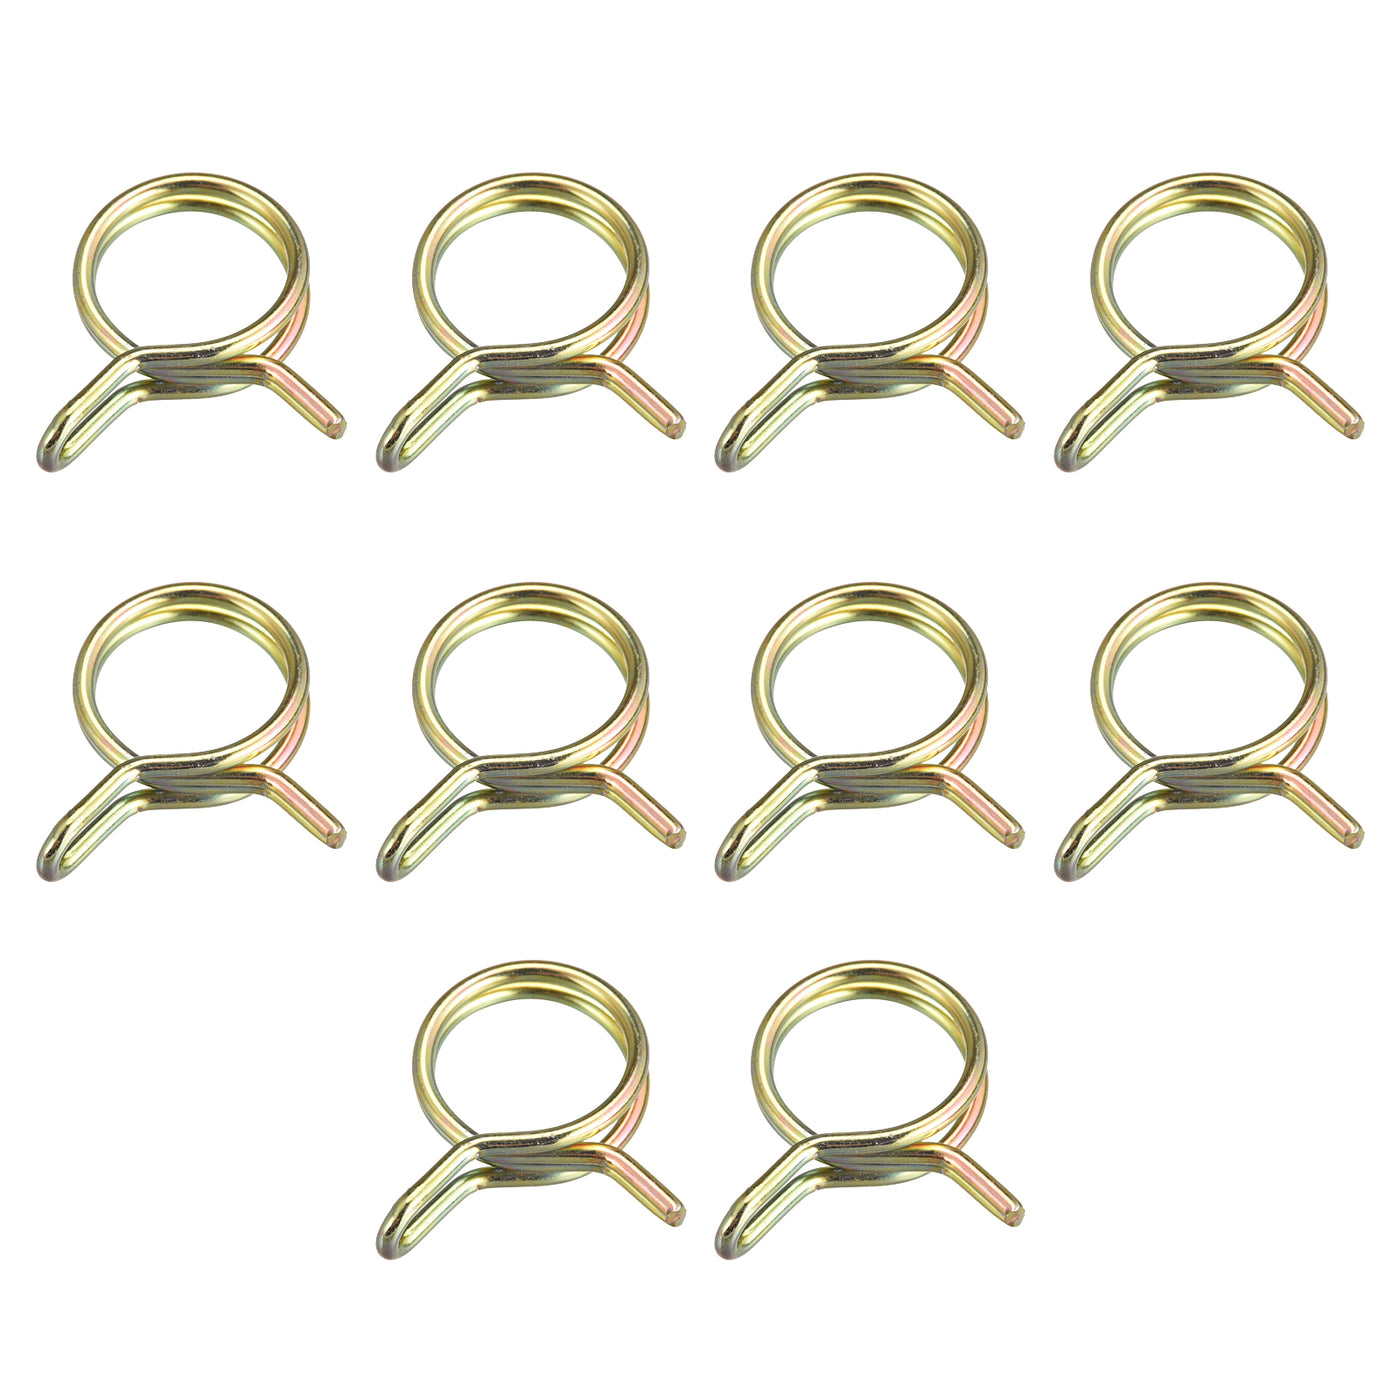 Uxcell Uxcell Double Wire Spring Hose Clamp, 20pcs 65Mn Steel 23mm Clips, Color Zinc Plated